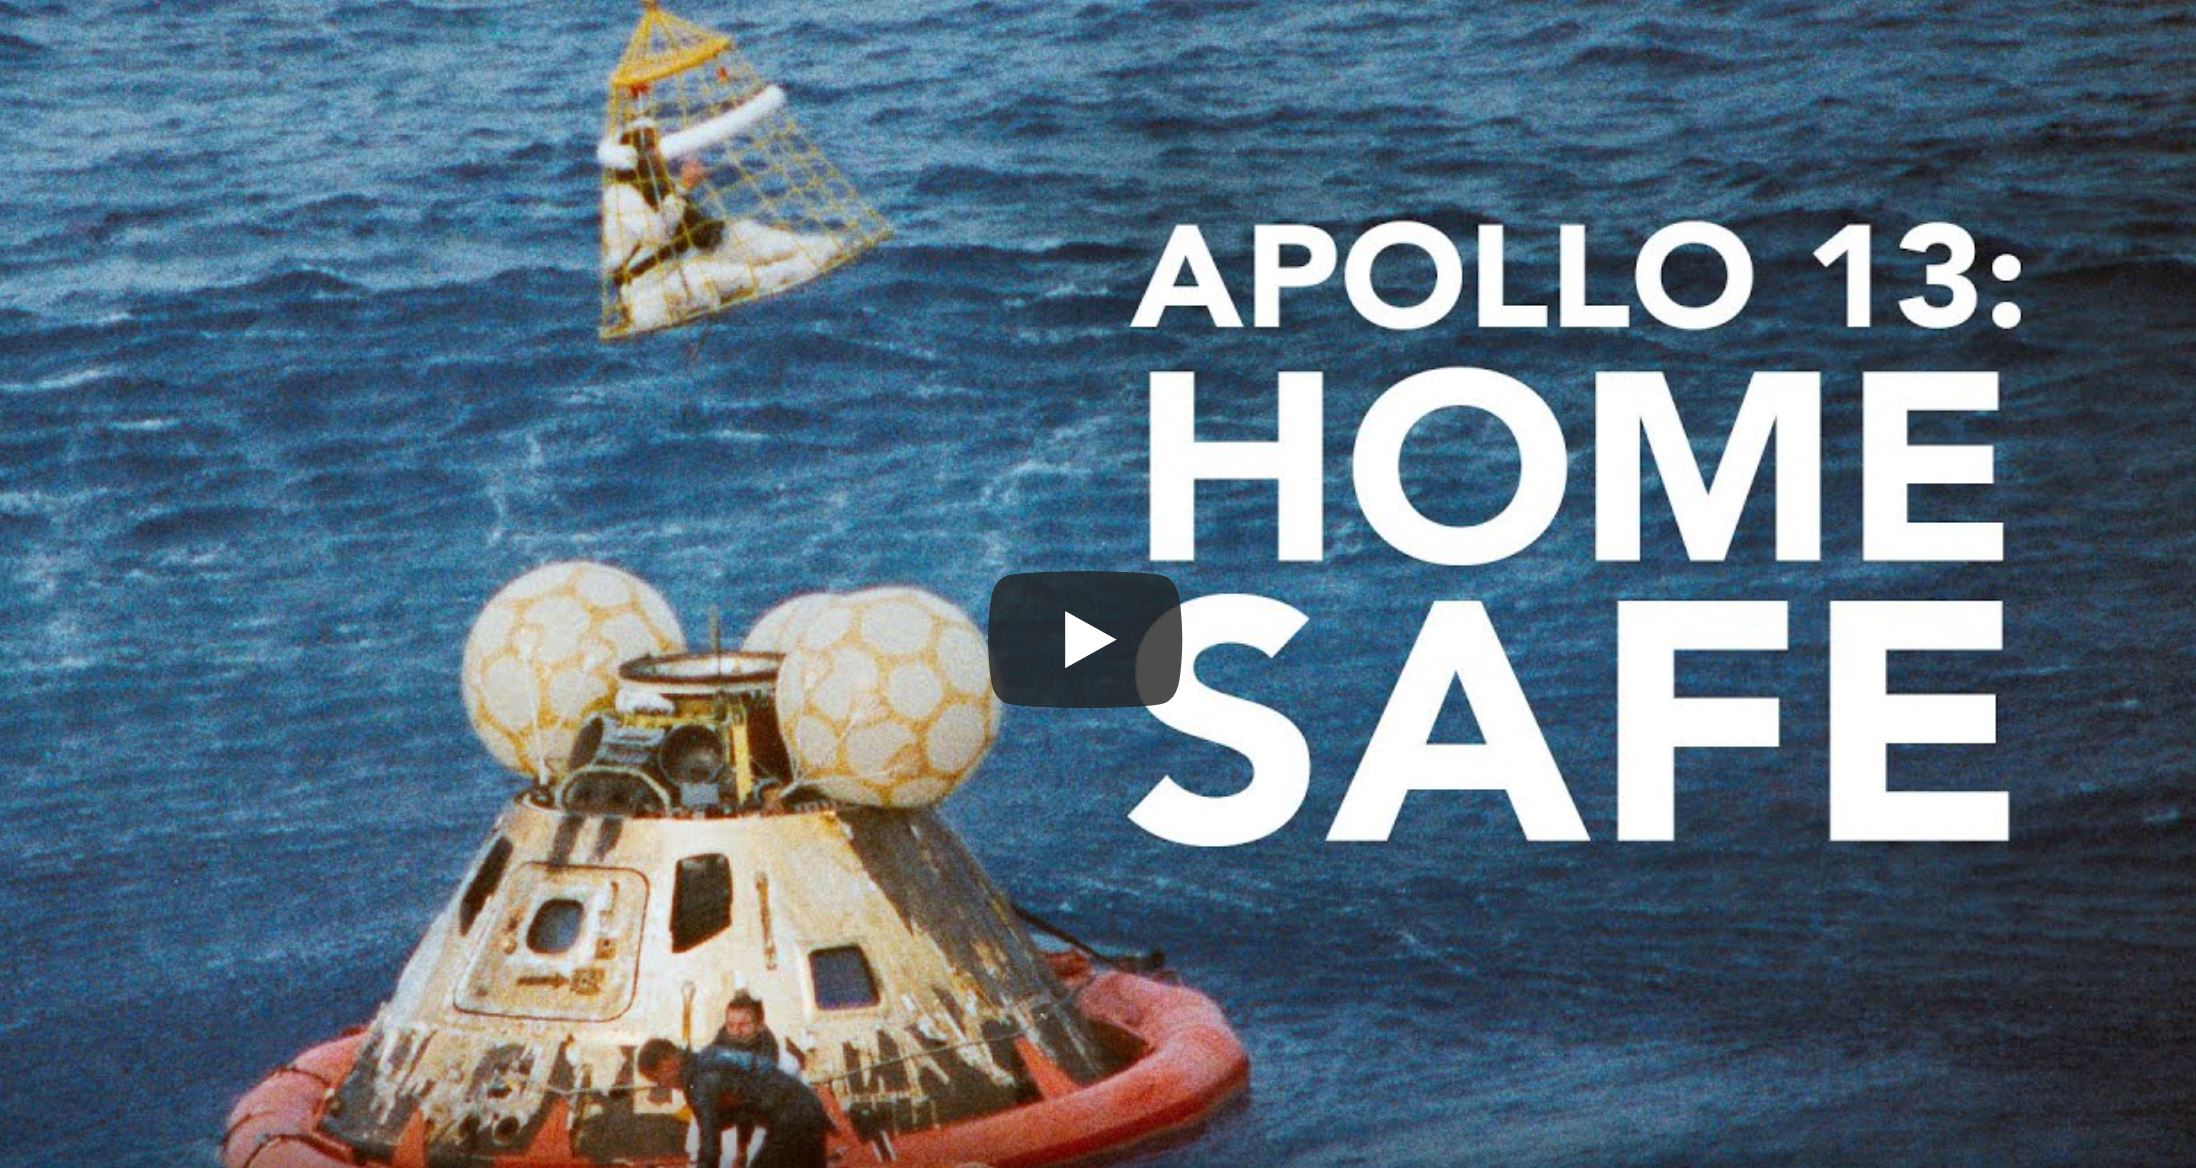 Apollo XIII +50: Watch this excellent NASA video about how they brought our astronauts home